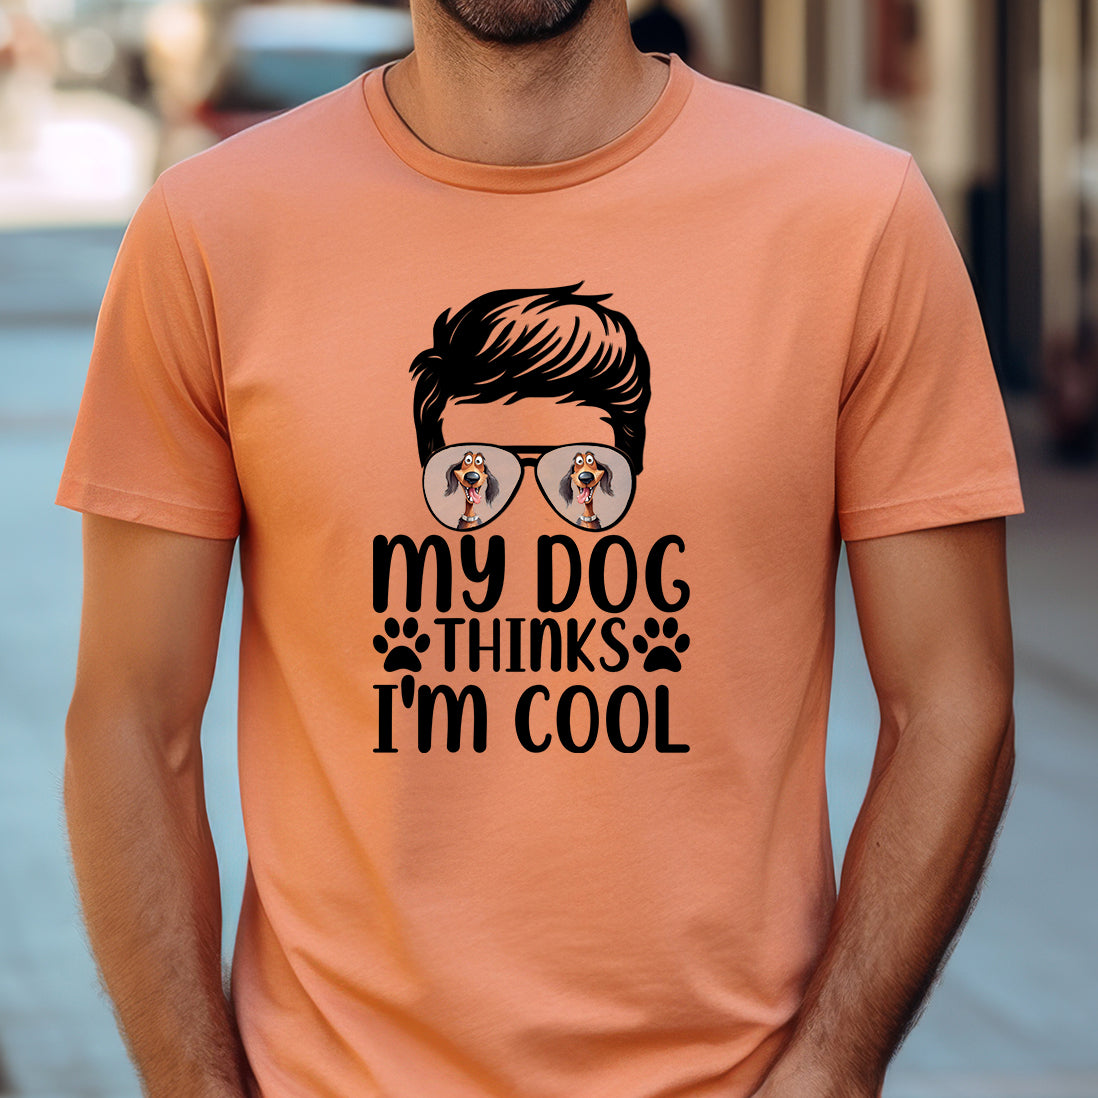 My Dog Thinks I'm Cool! - This cute tee is available in 4 colors